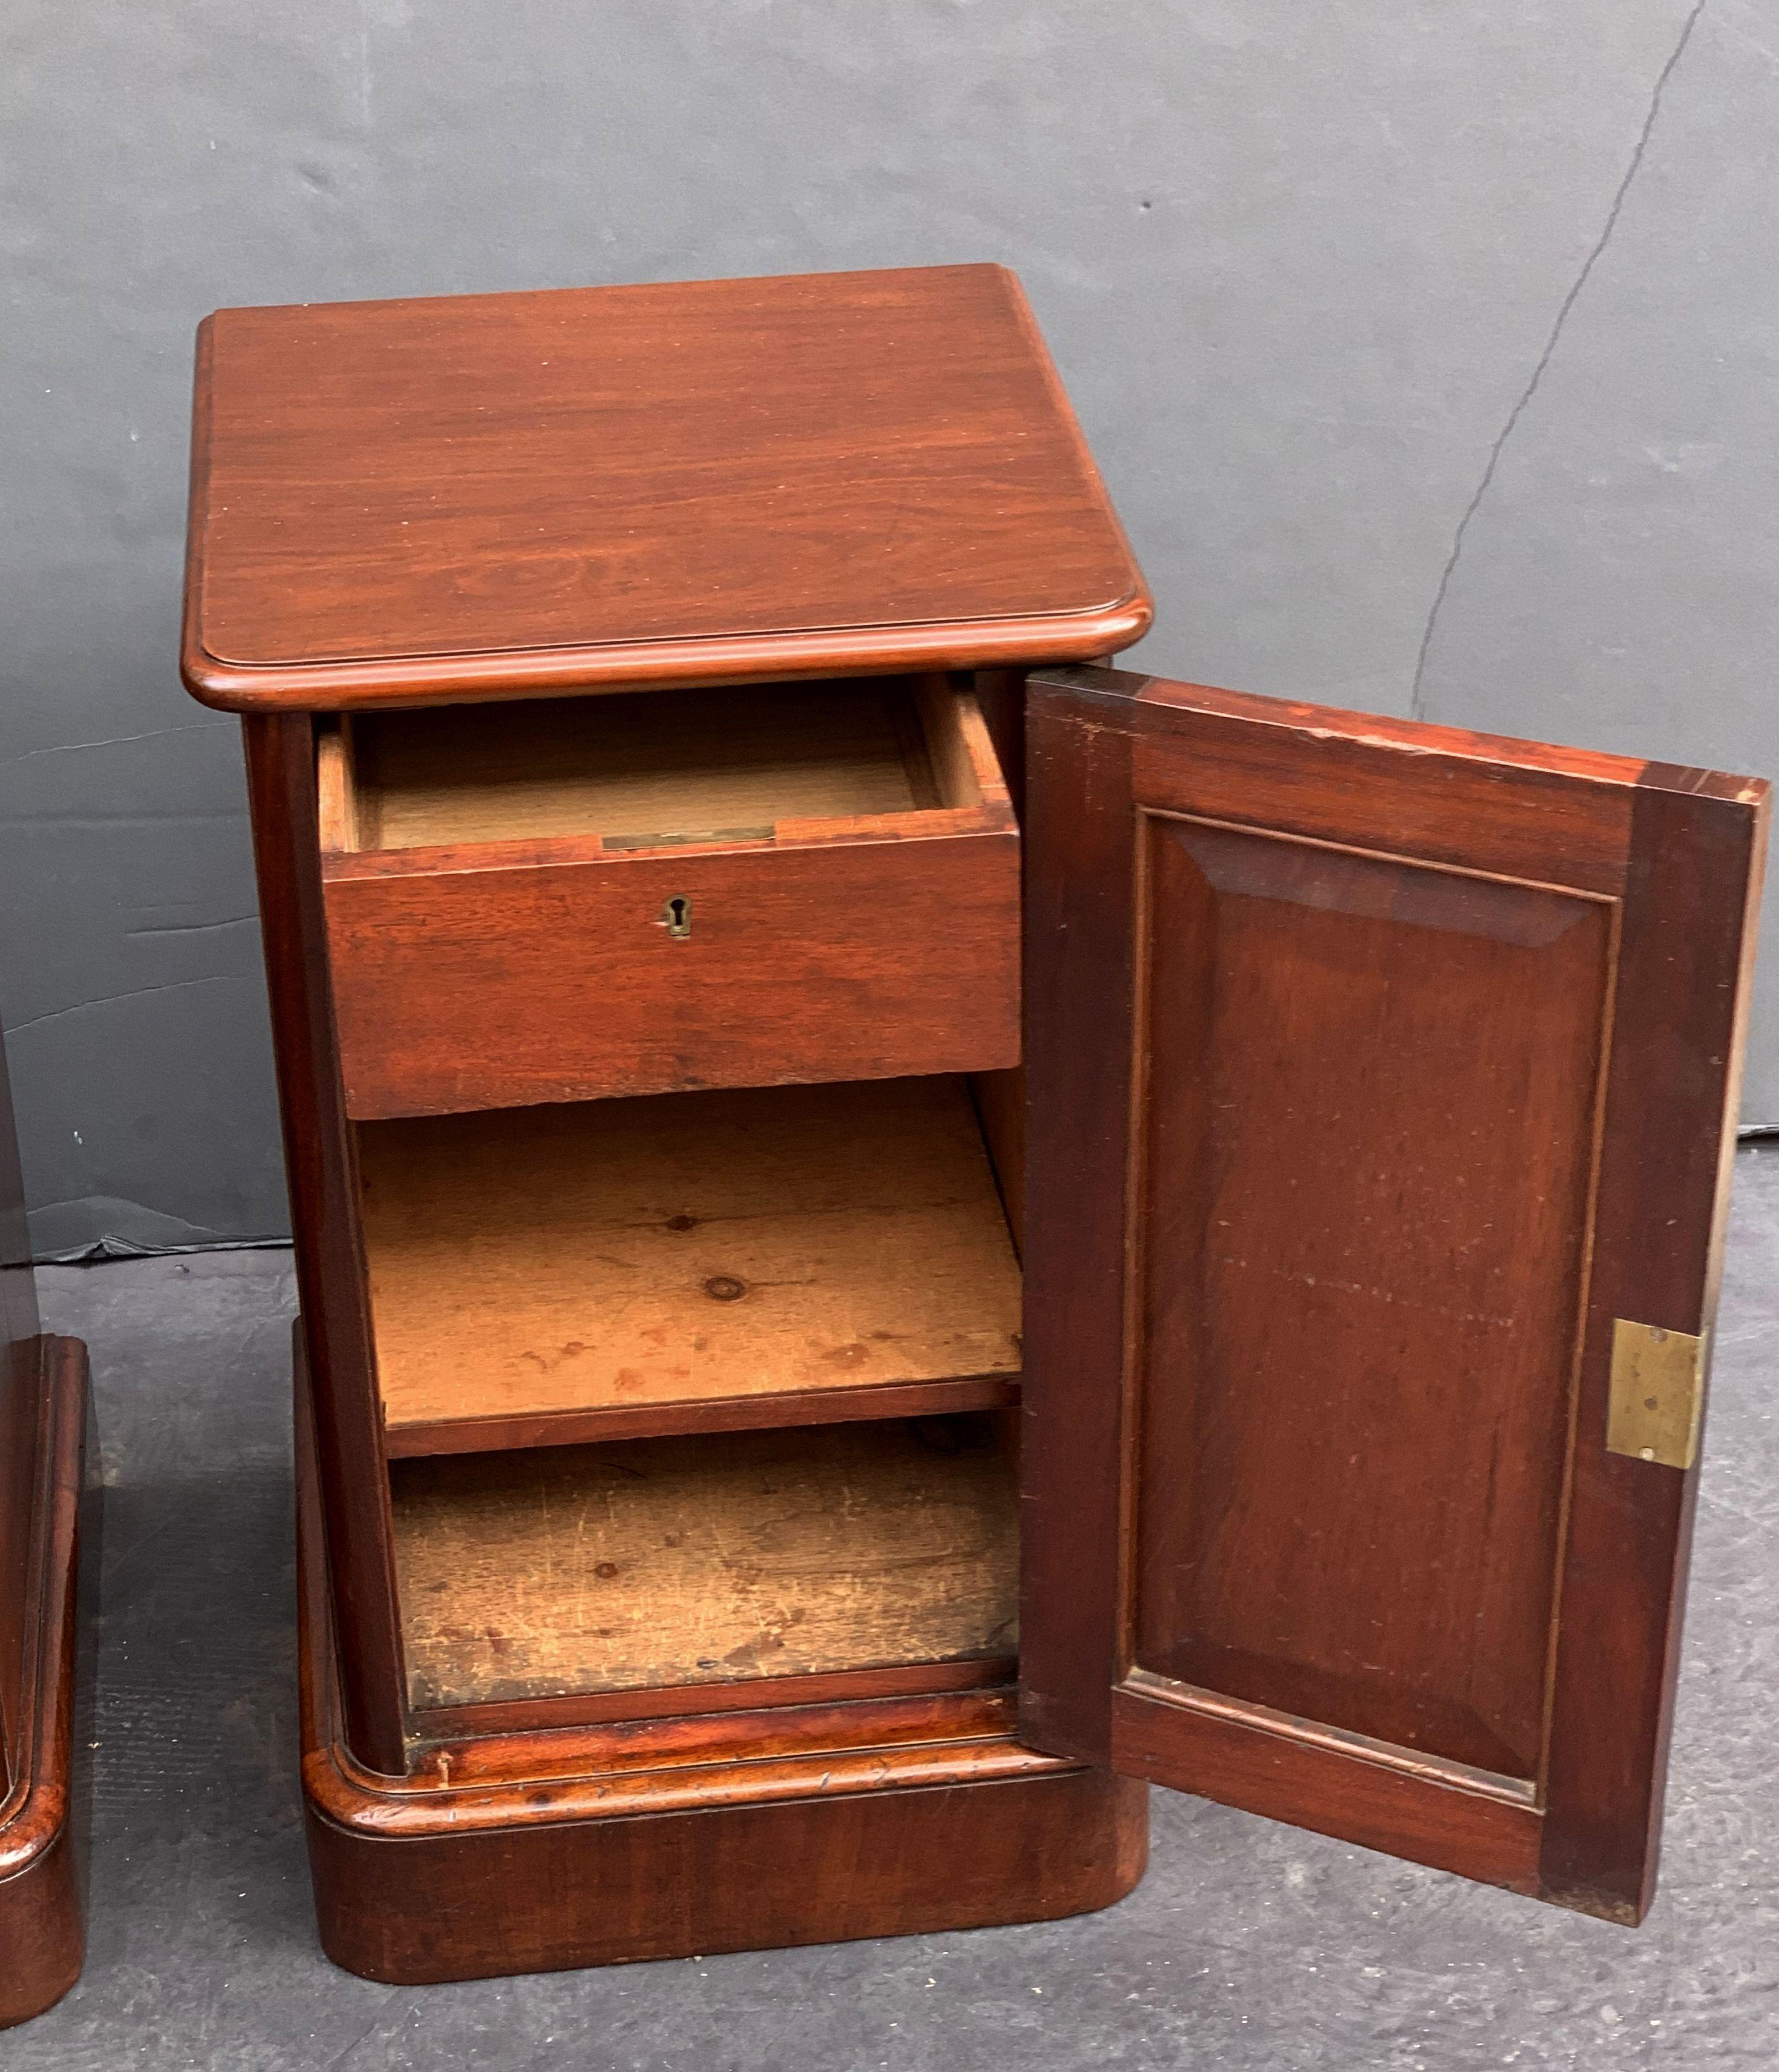 English Bedside Chests or Cabinet Nightstands of Mahogany, Priced as a Pair 13